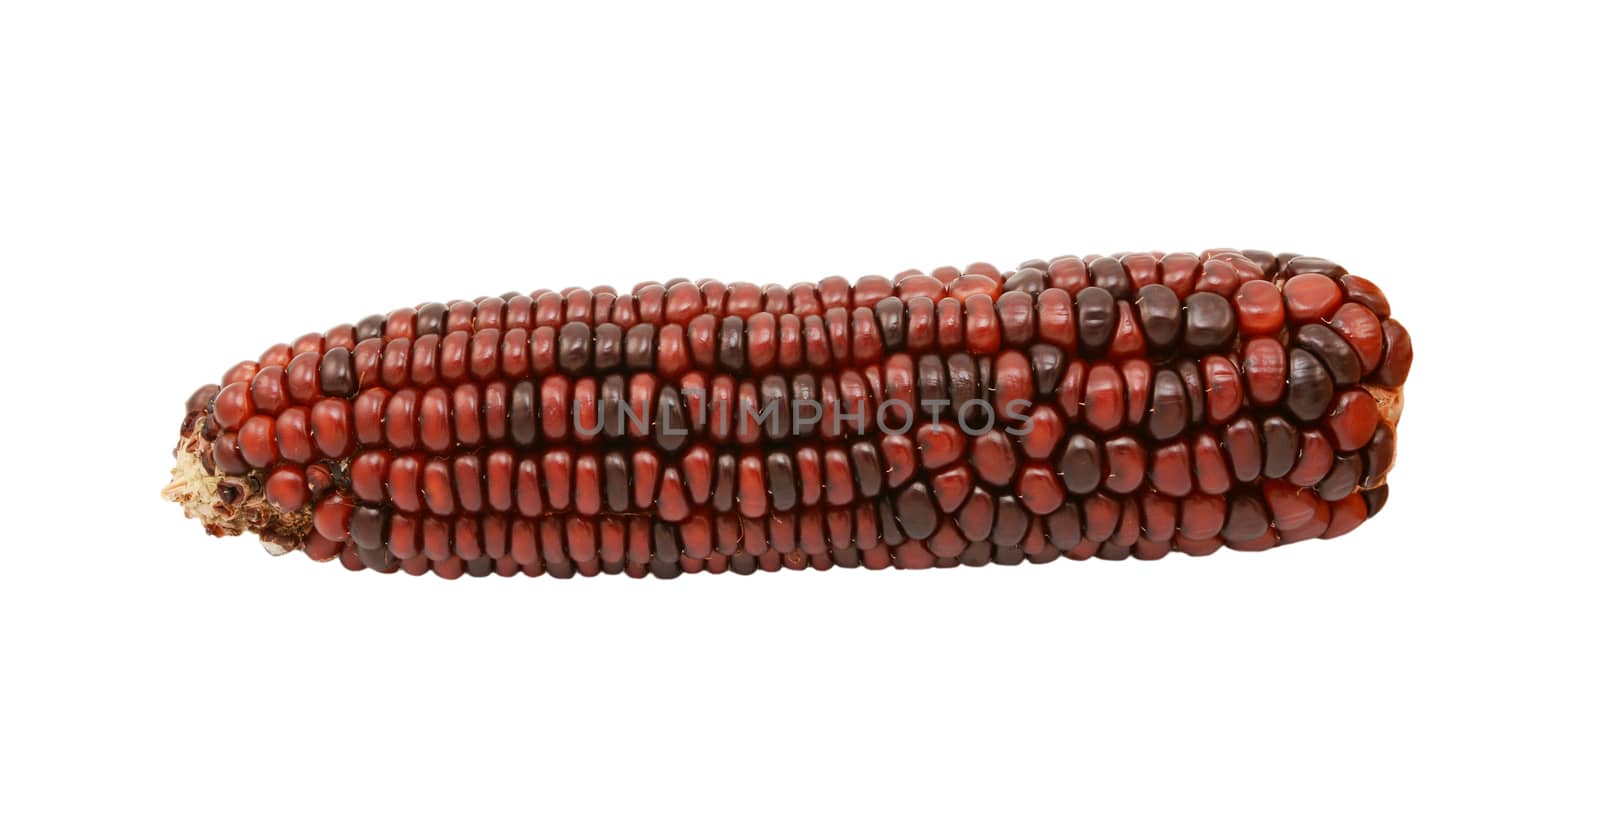 Ornamental sweetcorn cob with dark red and brown niblets by sarahdoow